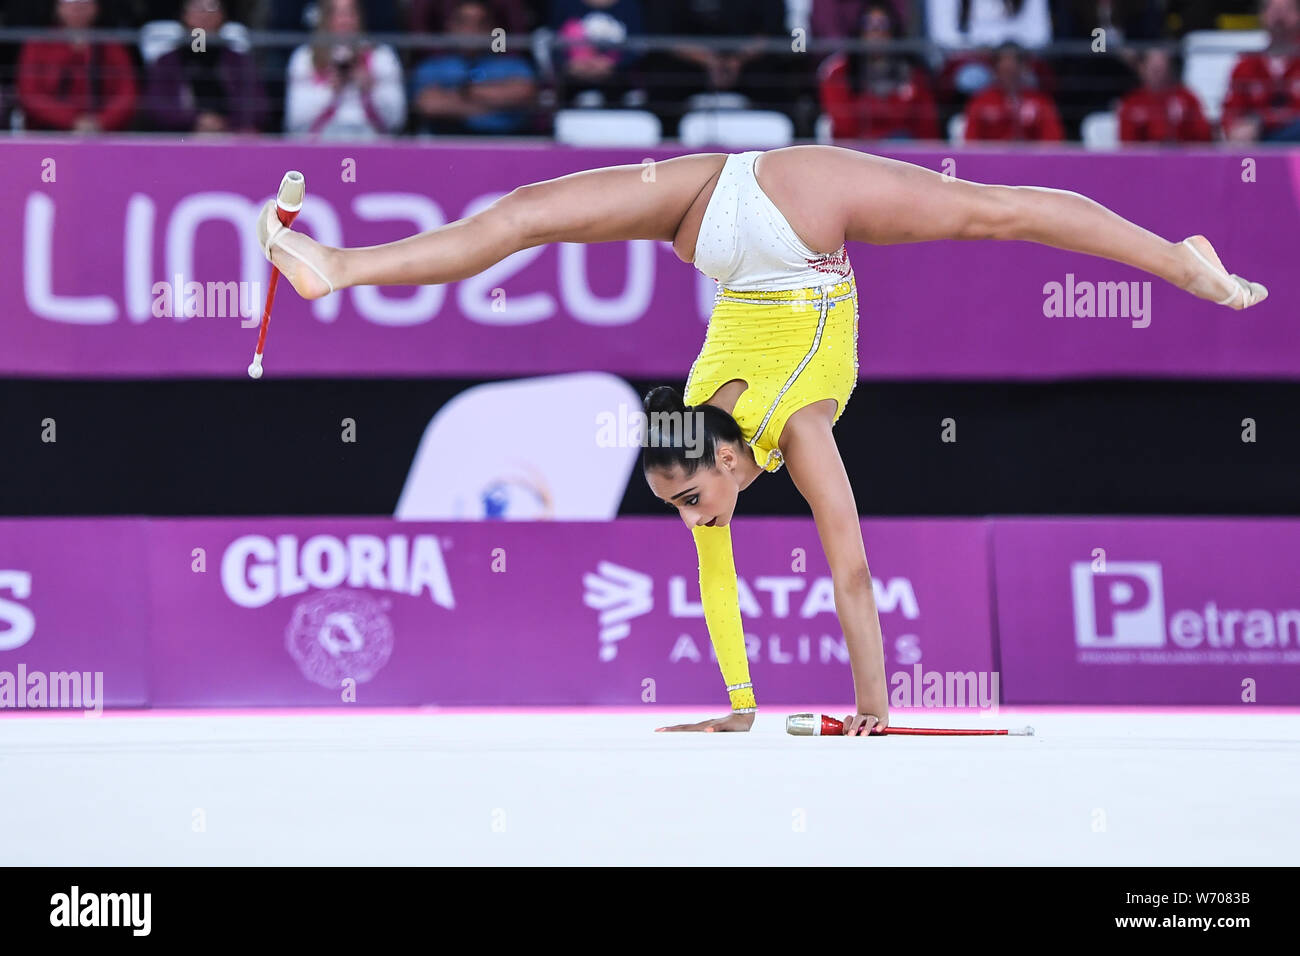 Lima, Peru. 3rd Aug, 2019. KARLA DIAZ competes in the individual All-Around with the clubs during the competition held in the Polideportivo Villa El Salvador in Lima, Peru. Credit: Amy Sanderson/ZUMA Wire/Alamy Live News Stock Photo